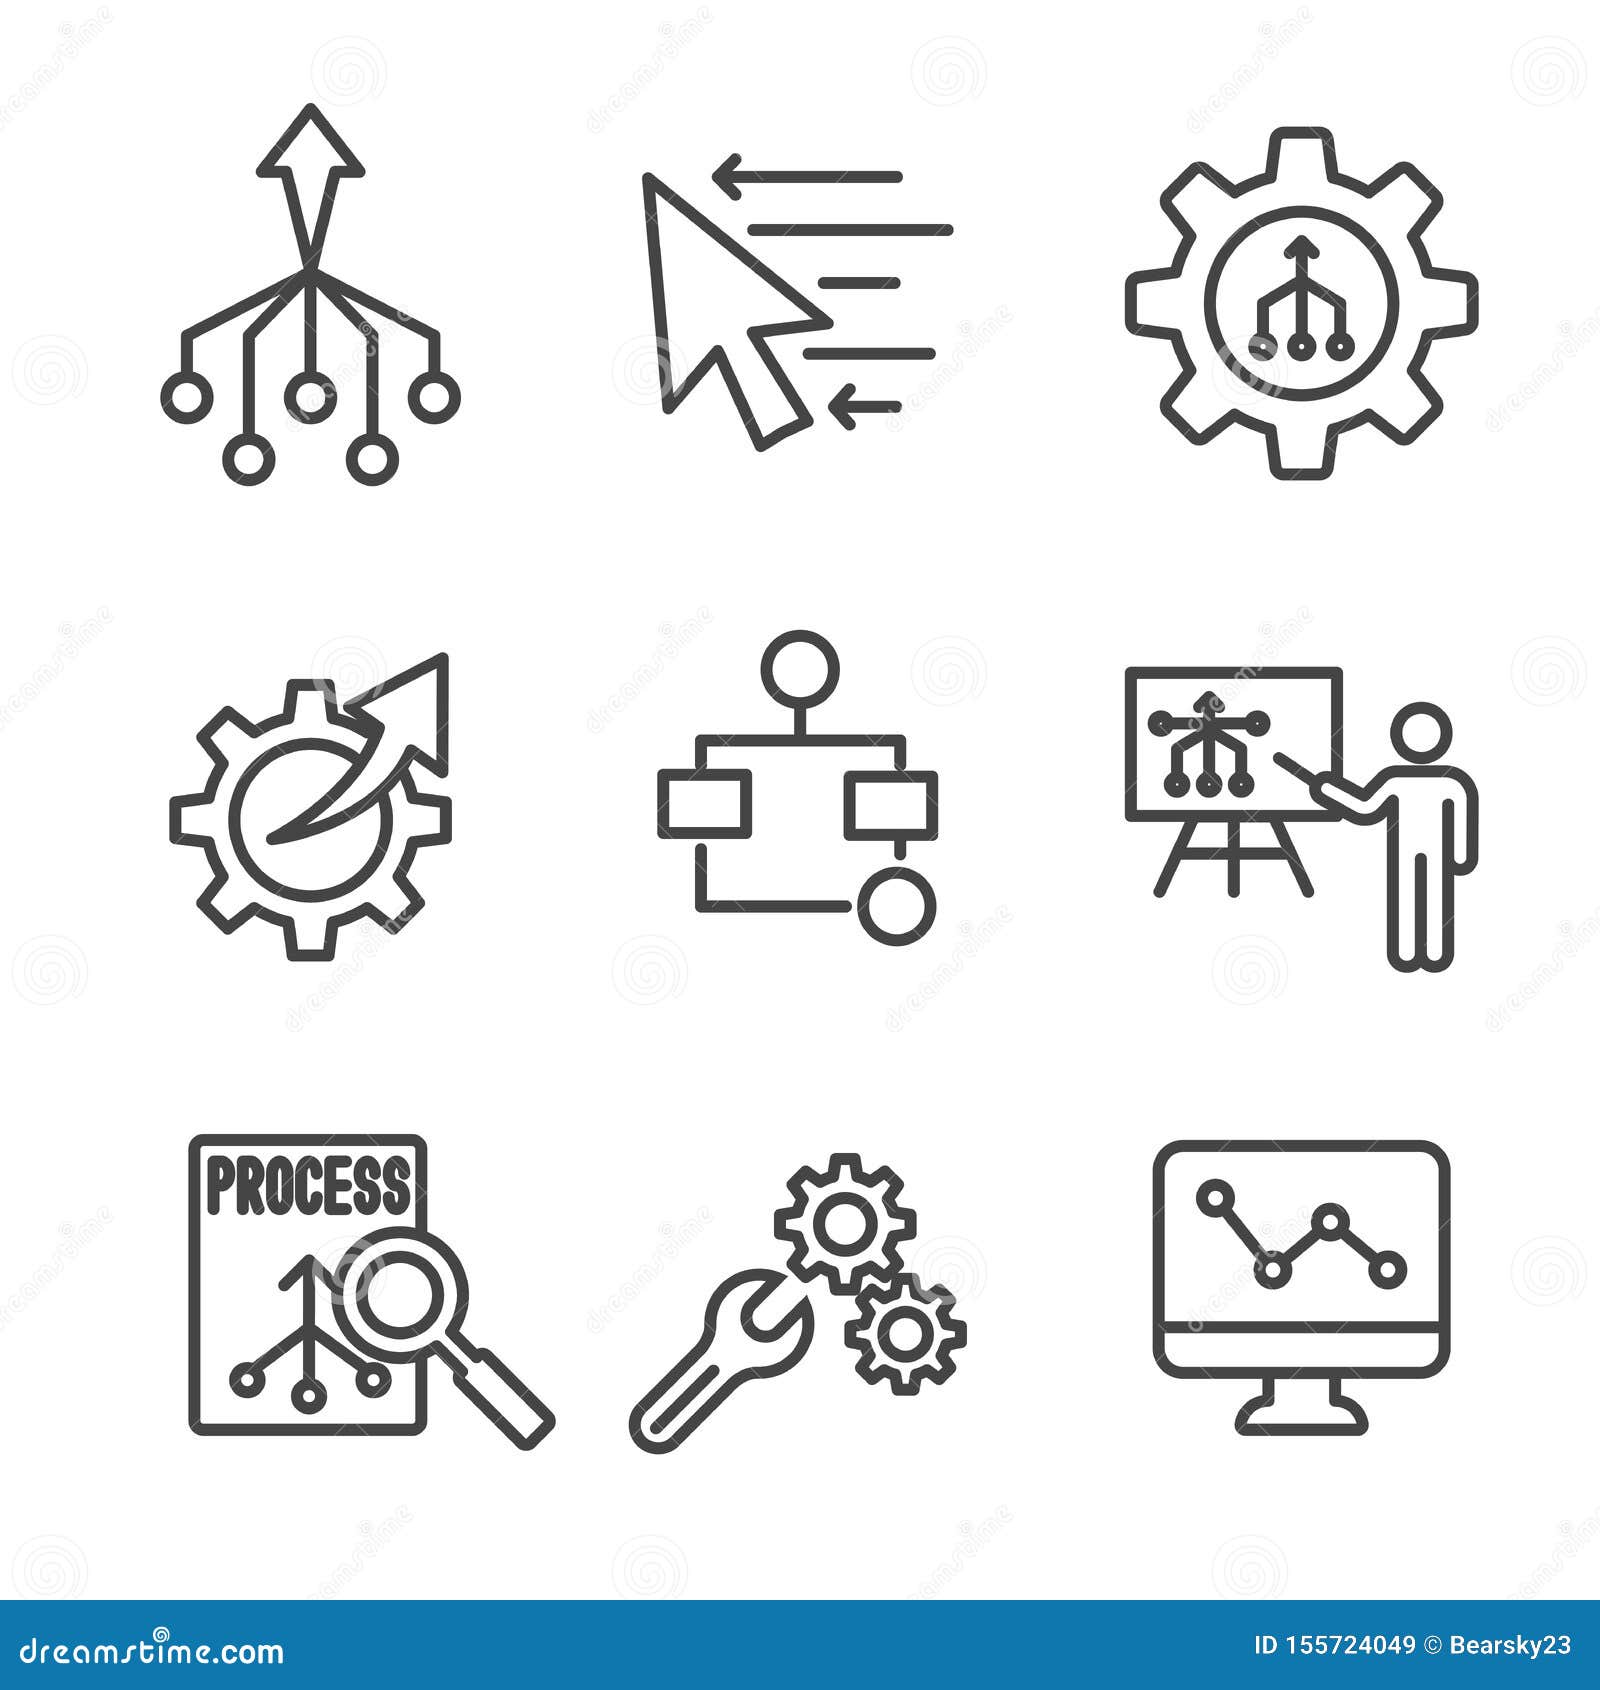 workflow efficiency icon set - has operations, processes, automation, etc